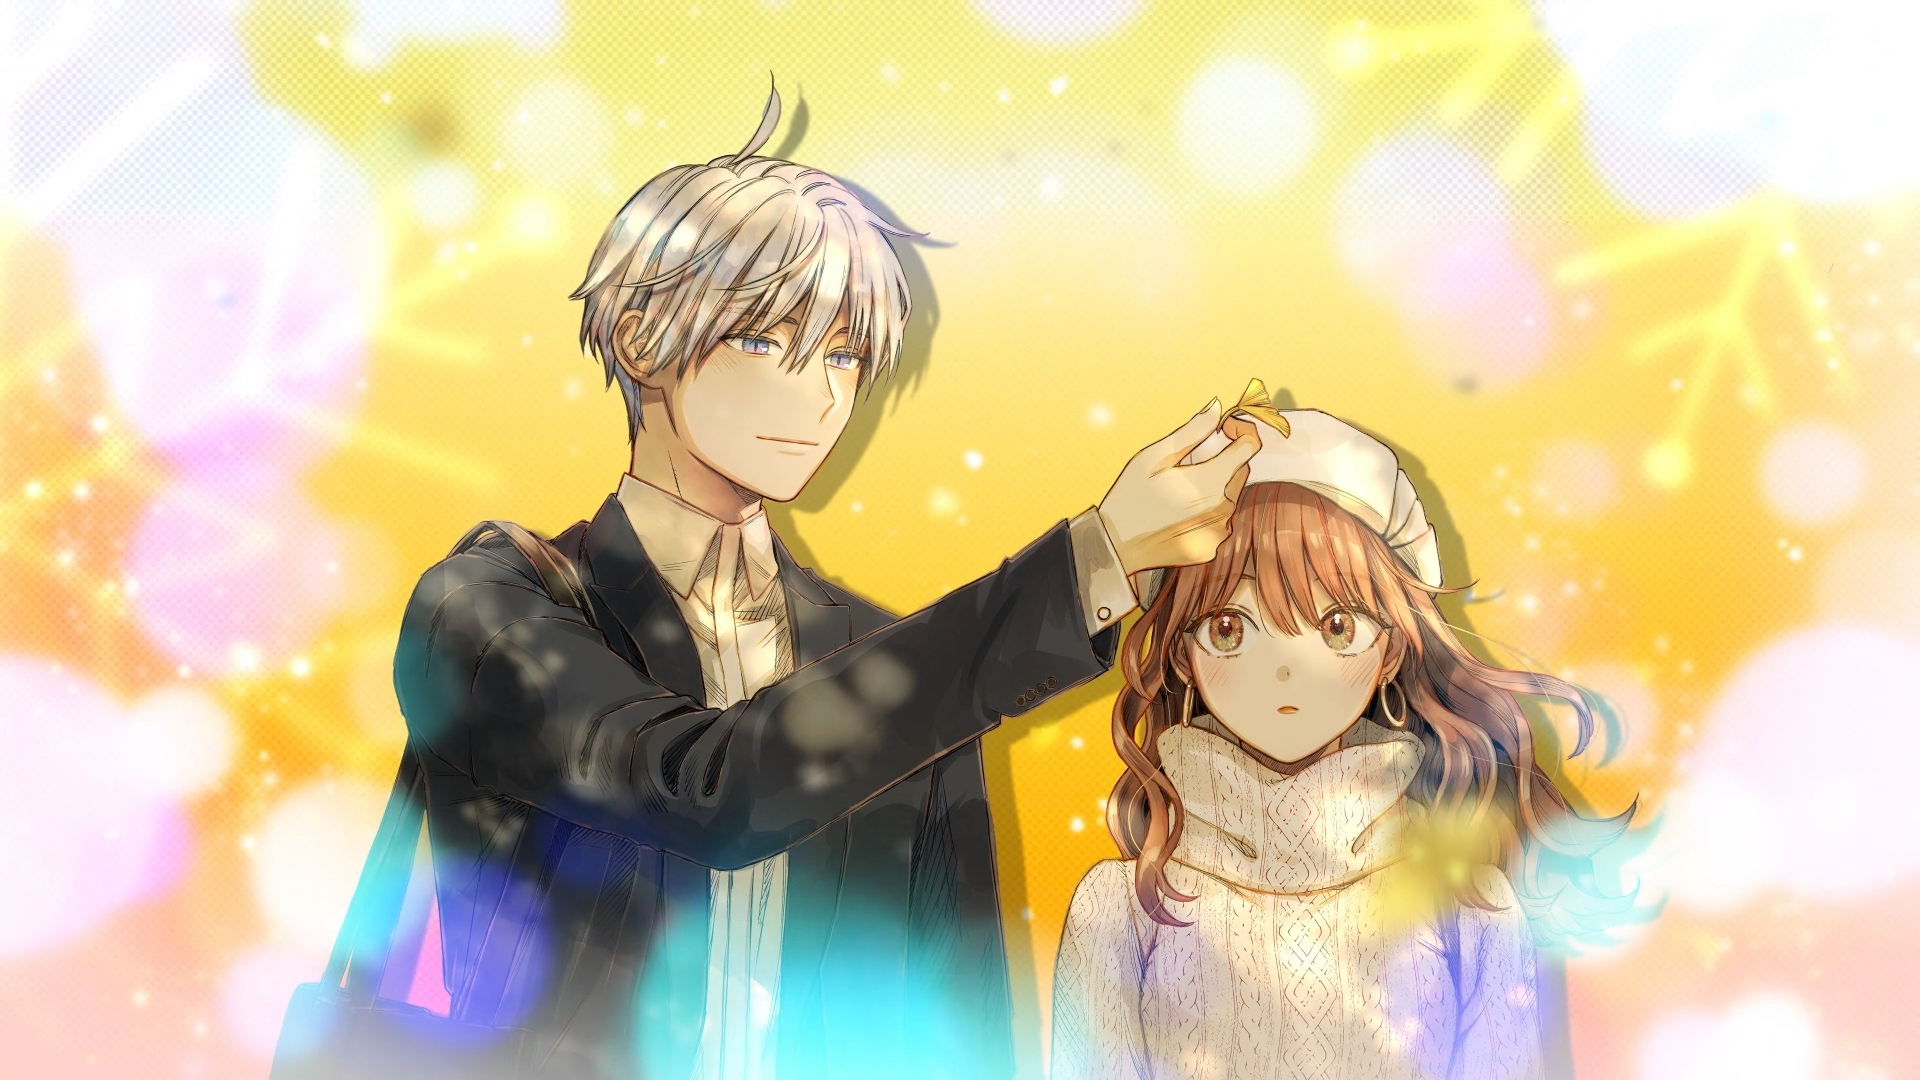 Anime 1920x1080 anime Fuyutsuki Himuro The Ice Guy and His Cool Female Colleague anime boys anime girls snowflakes earring hoop earrings sweater hat simple background minimalism